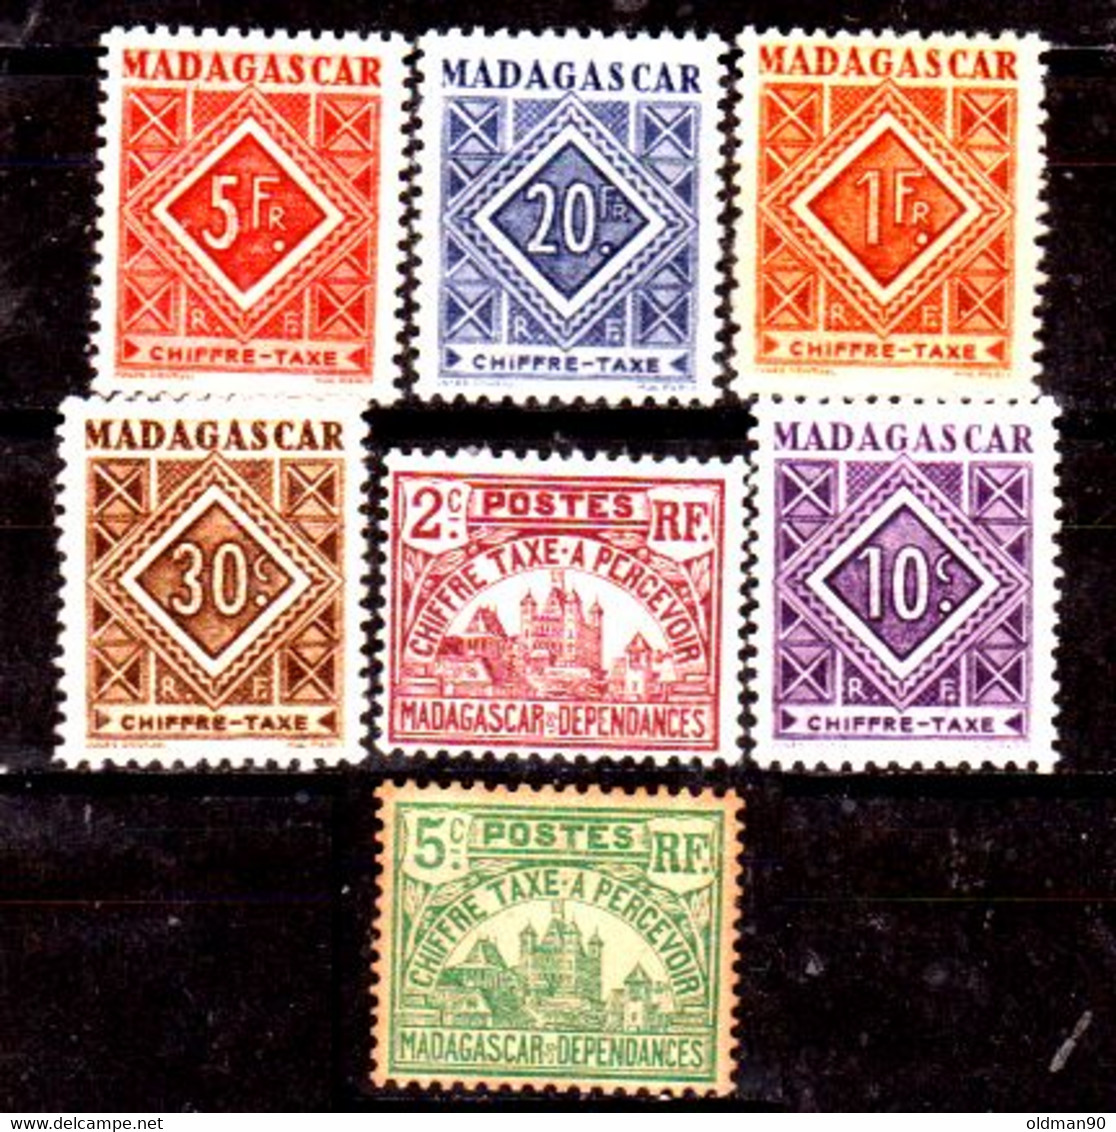 Madagascar -137- POSTAGE DUE STAMPS, Issued By 1908-1962 - Quality In Your Opinion. - Segnatasse